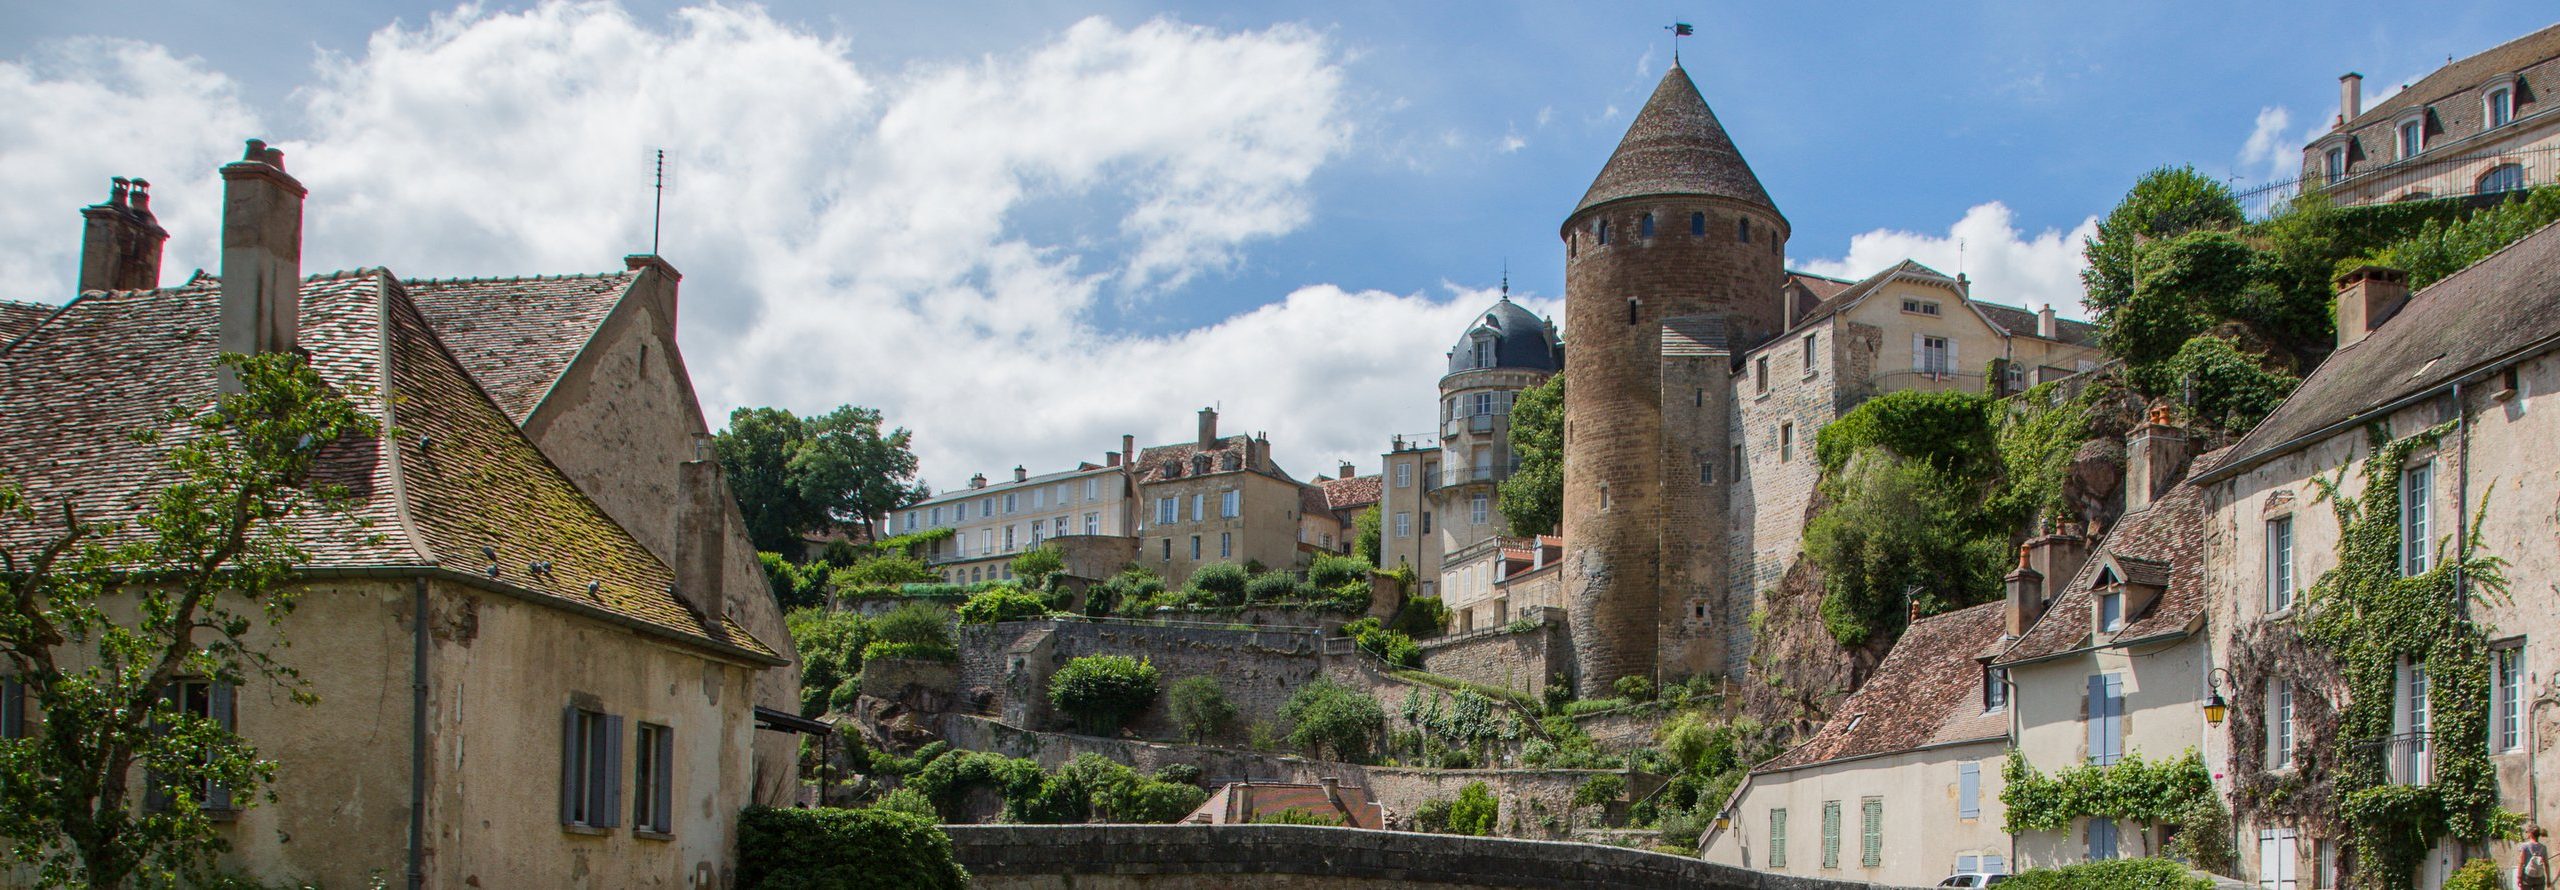 Enjoy pedaling through small villages on this guided bike tour in Burgundy